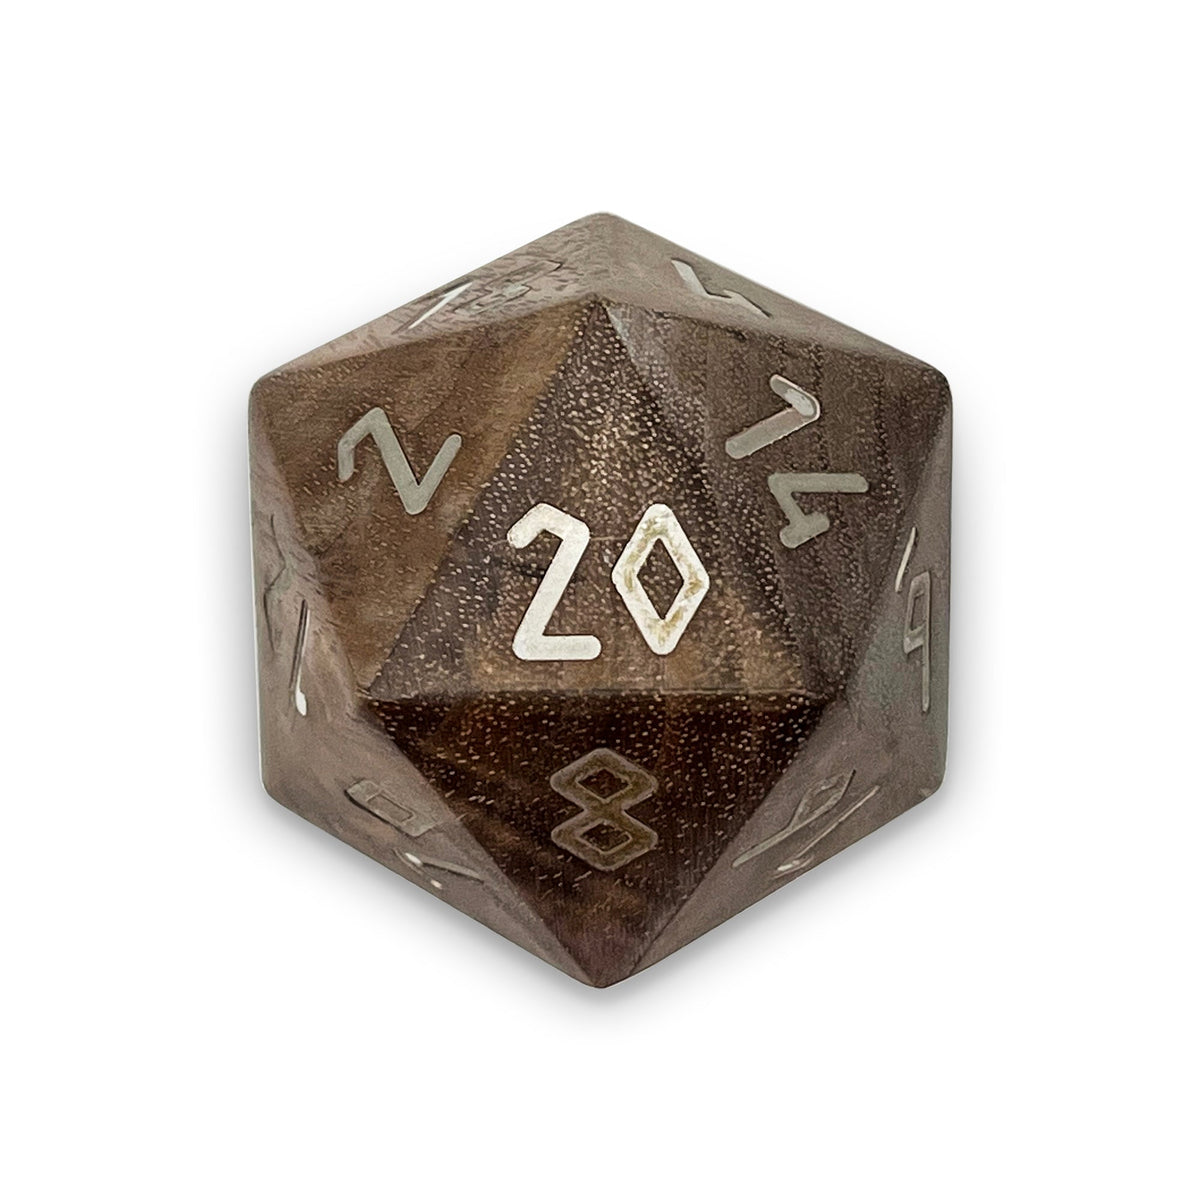 Black Walnut - Boulder with Silver Inlay 45mm Wooden Dice - NOR 02811